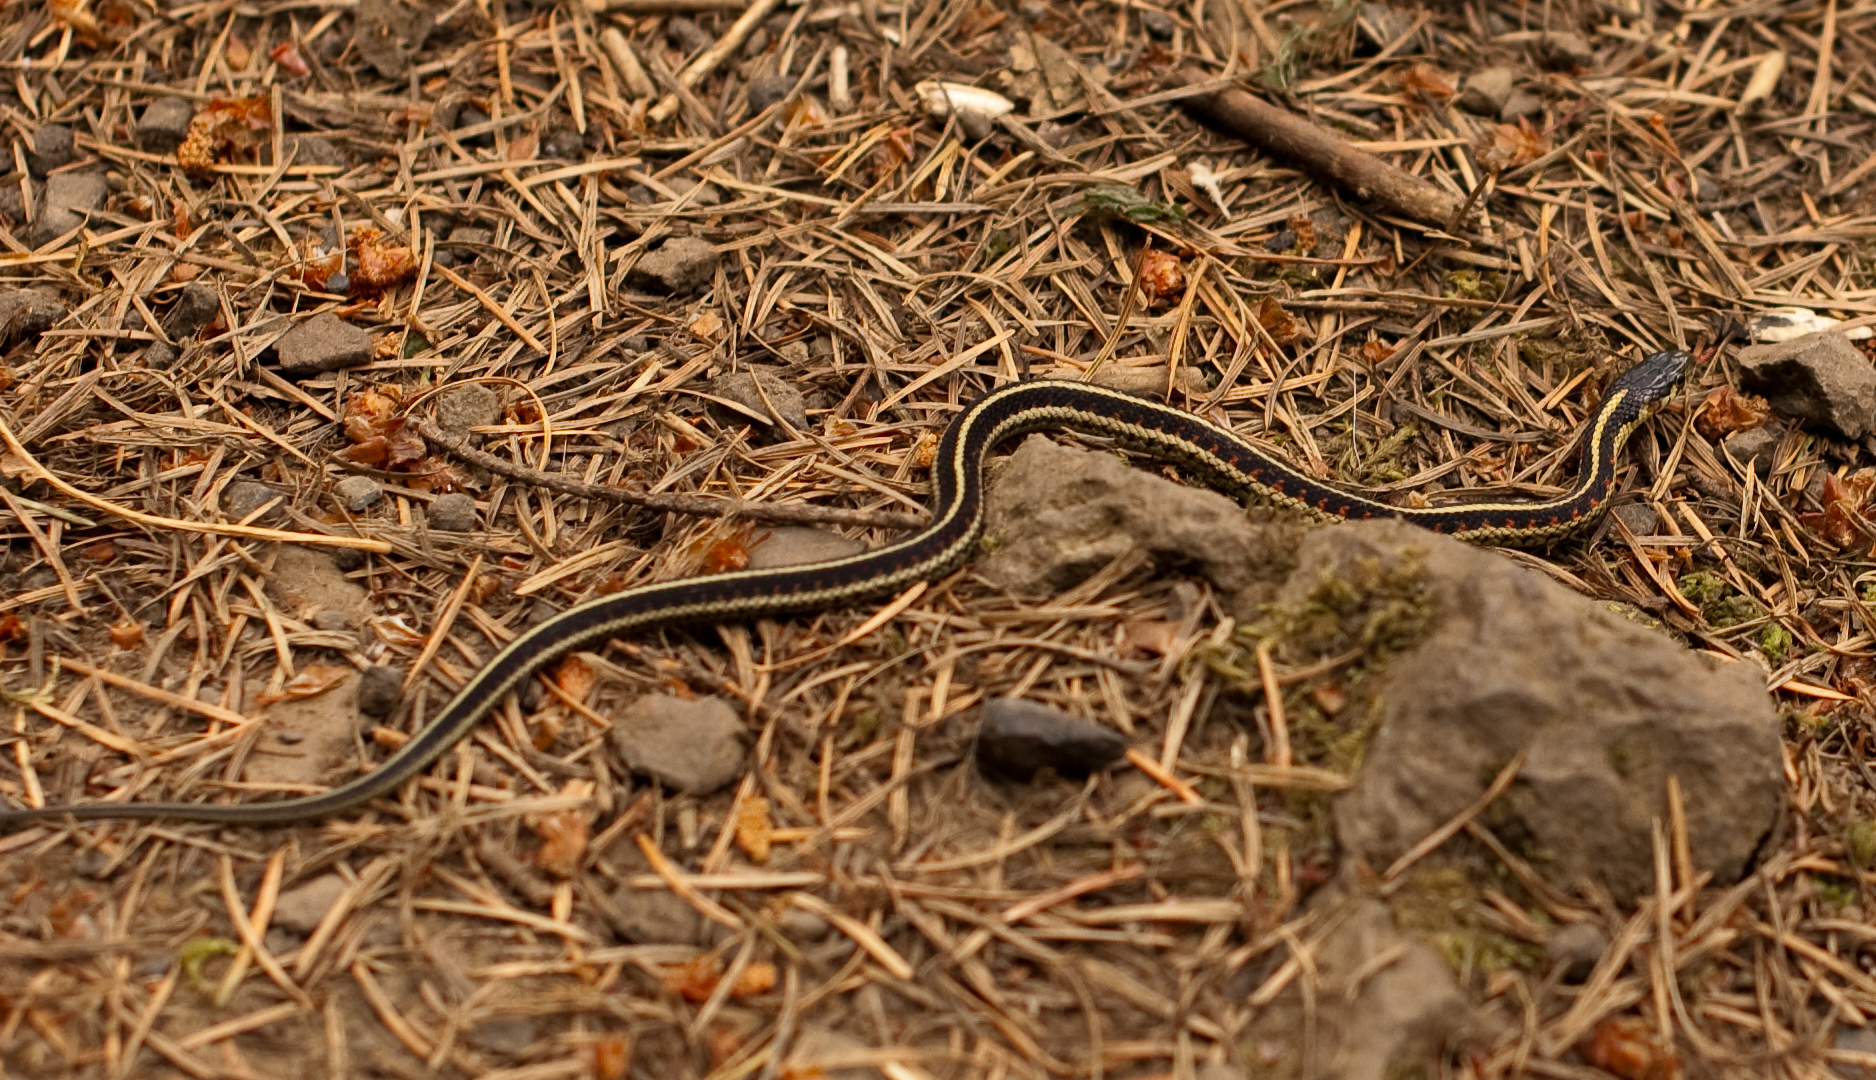 a snake is standing on the ground in a grass field